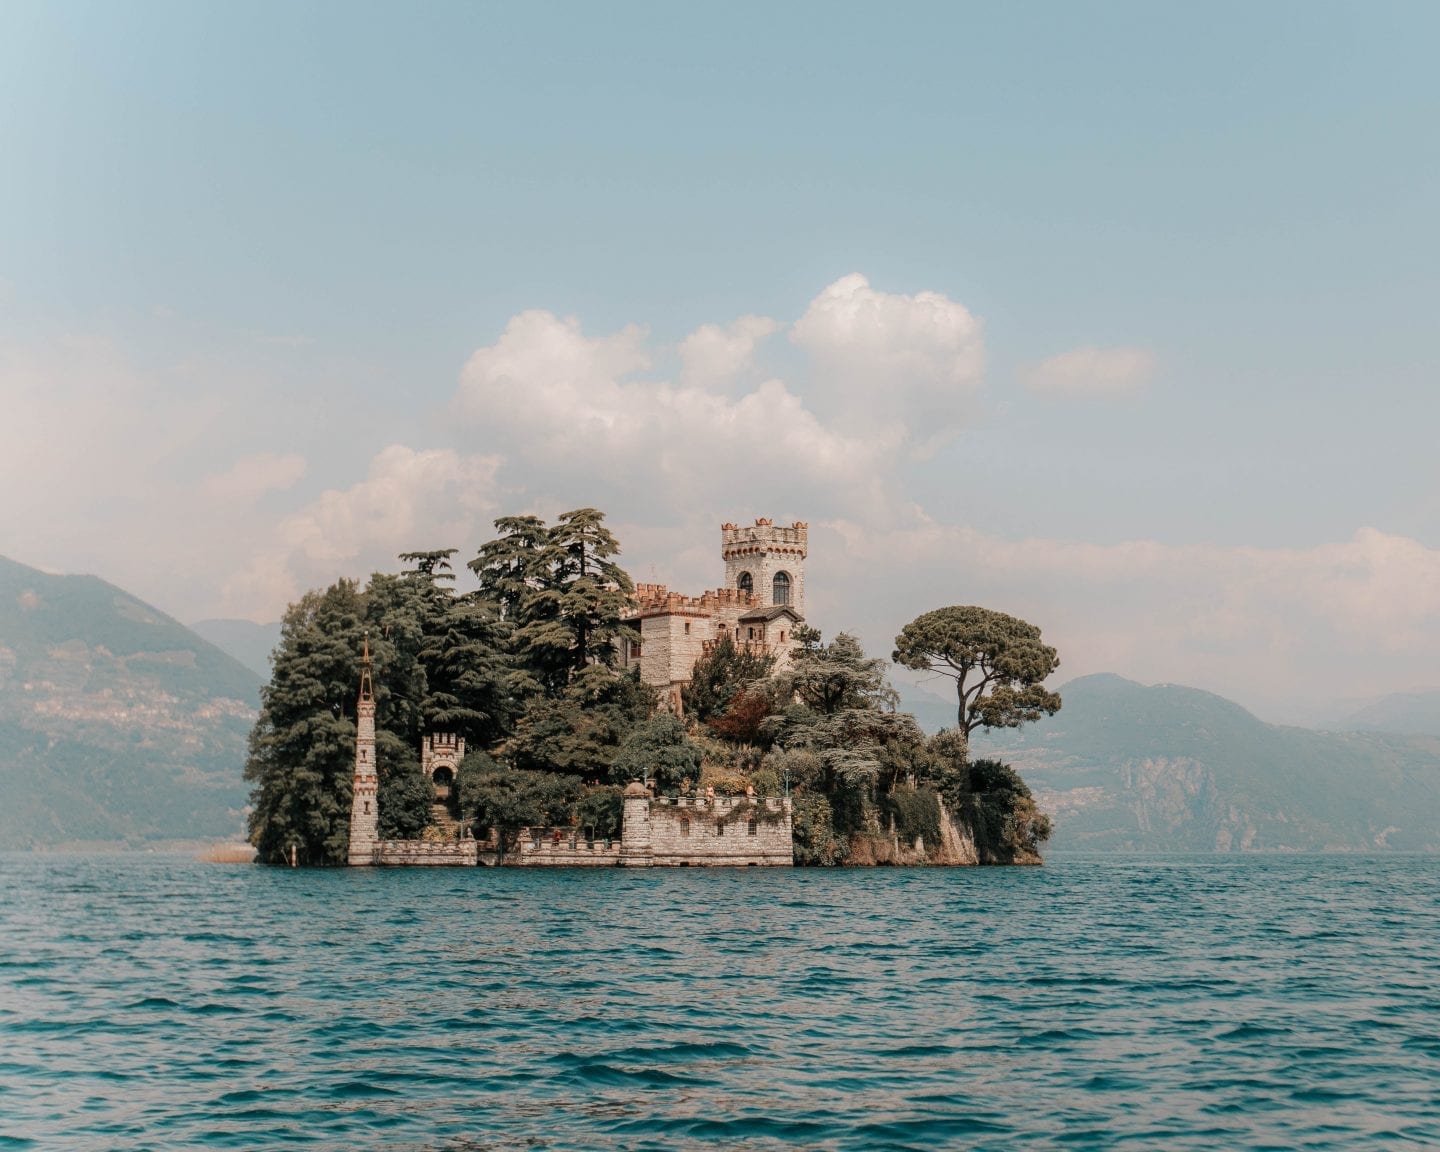 Castle on an Island in the middle of a lake - Isola di Loreto, Lake Iseo, Italy - Day Trip from Milan